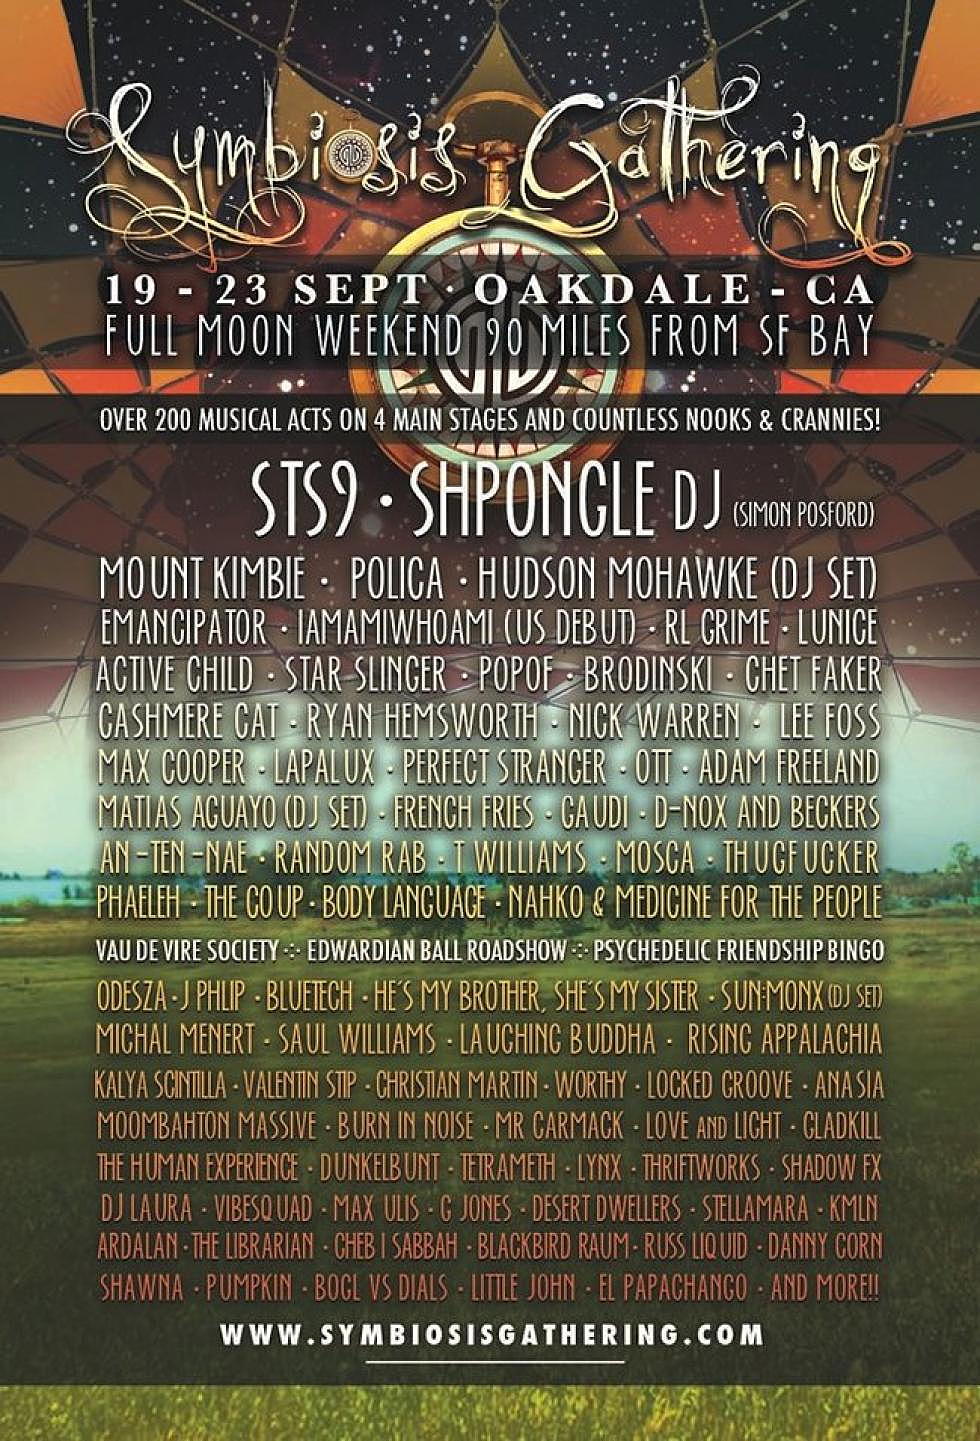 Symbiosis Gathering 2013, Oakdale, CA, September 19th-23rd